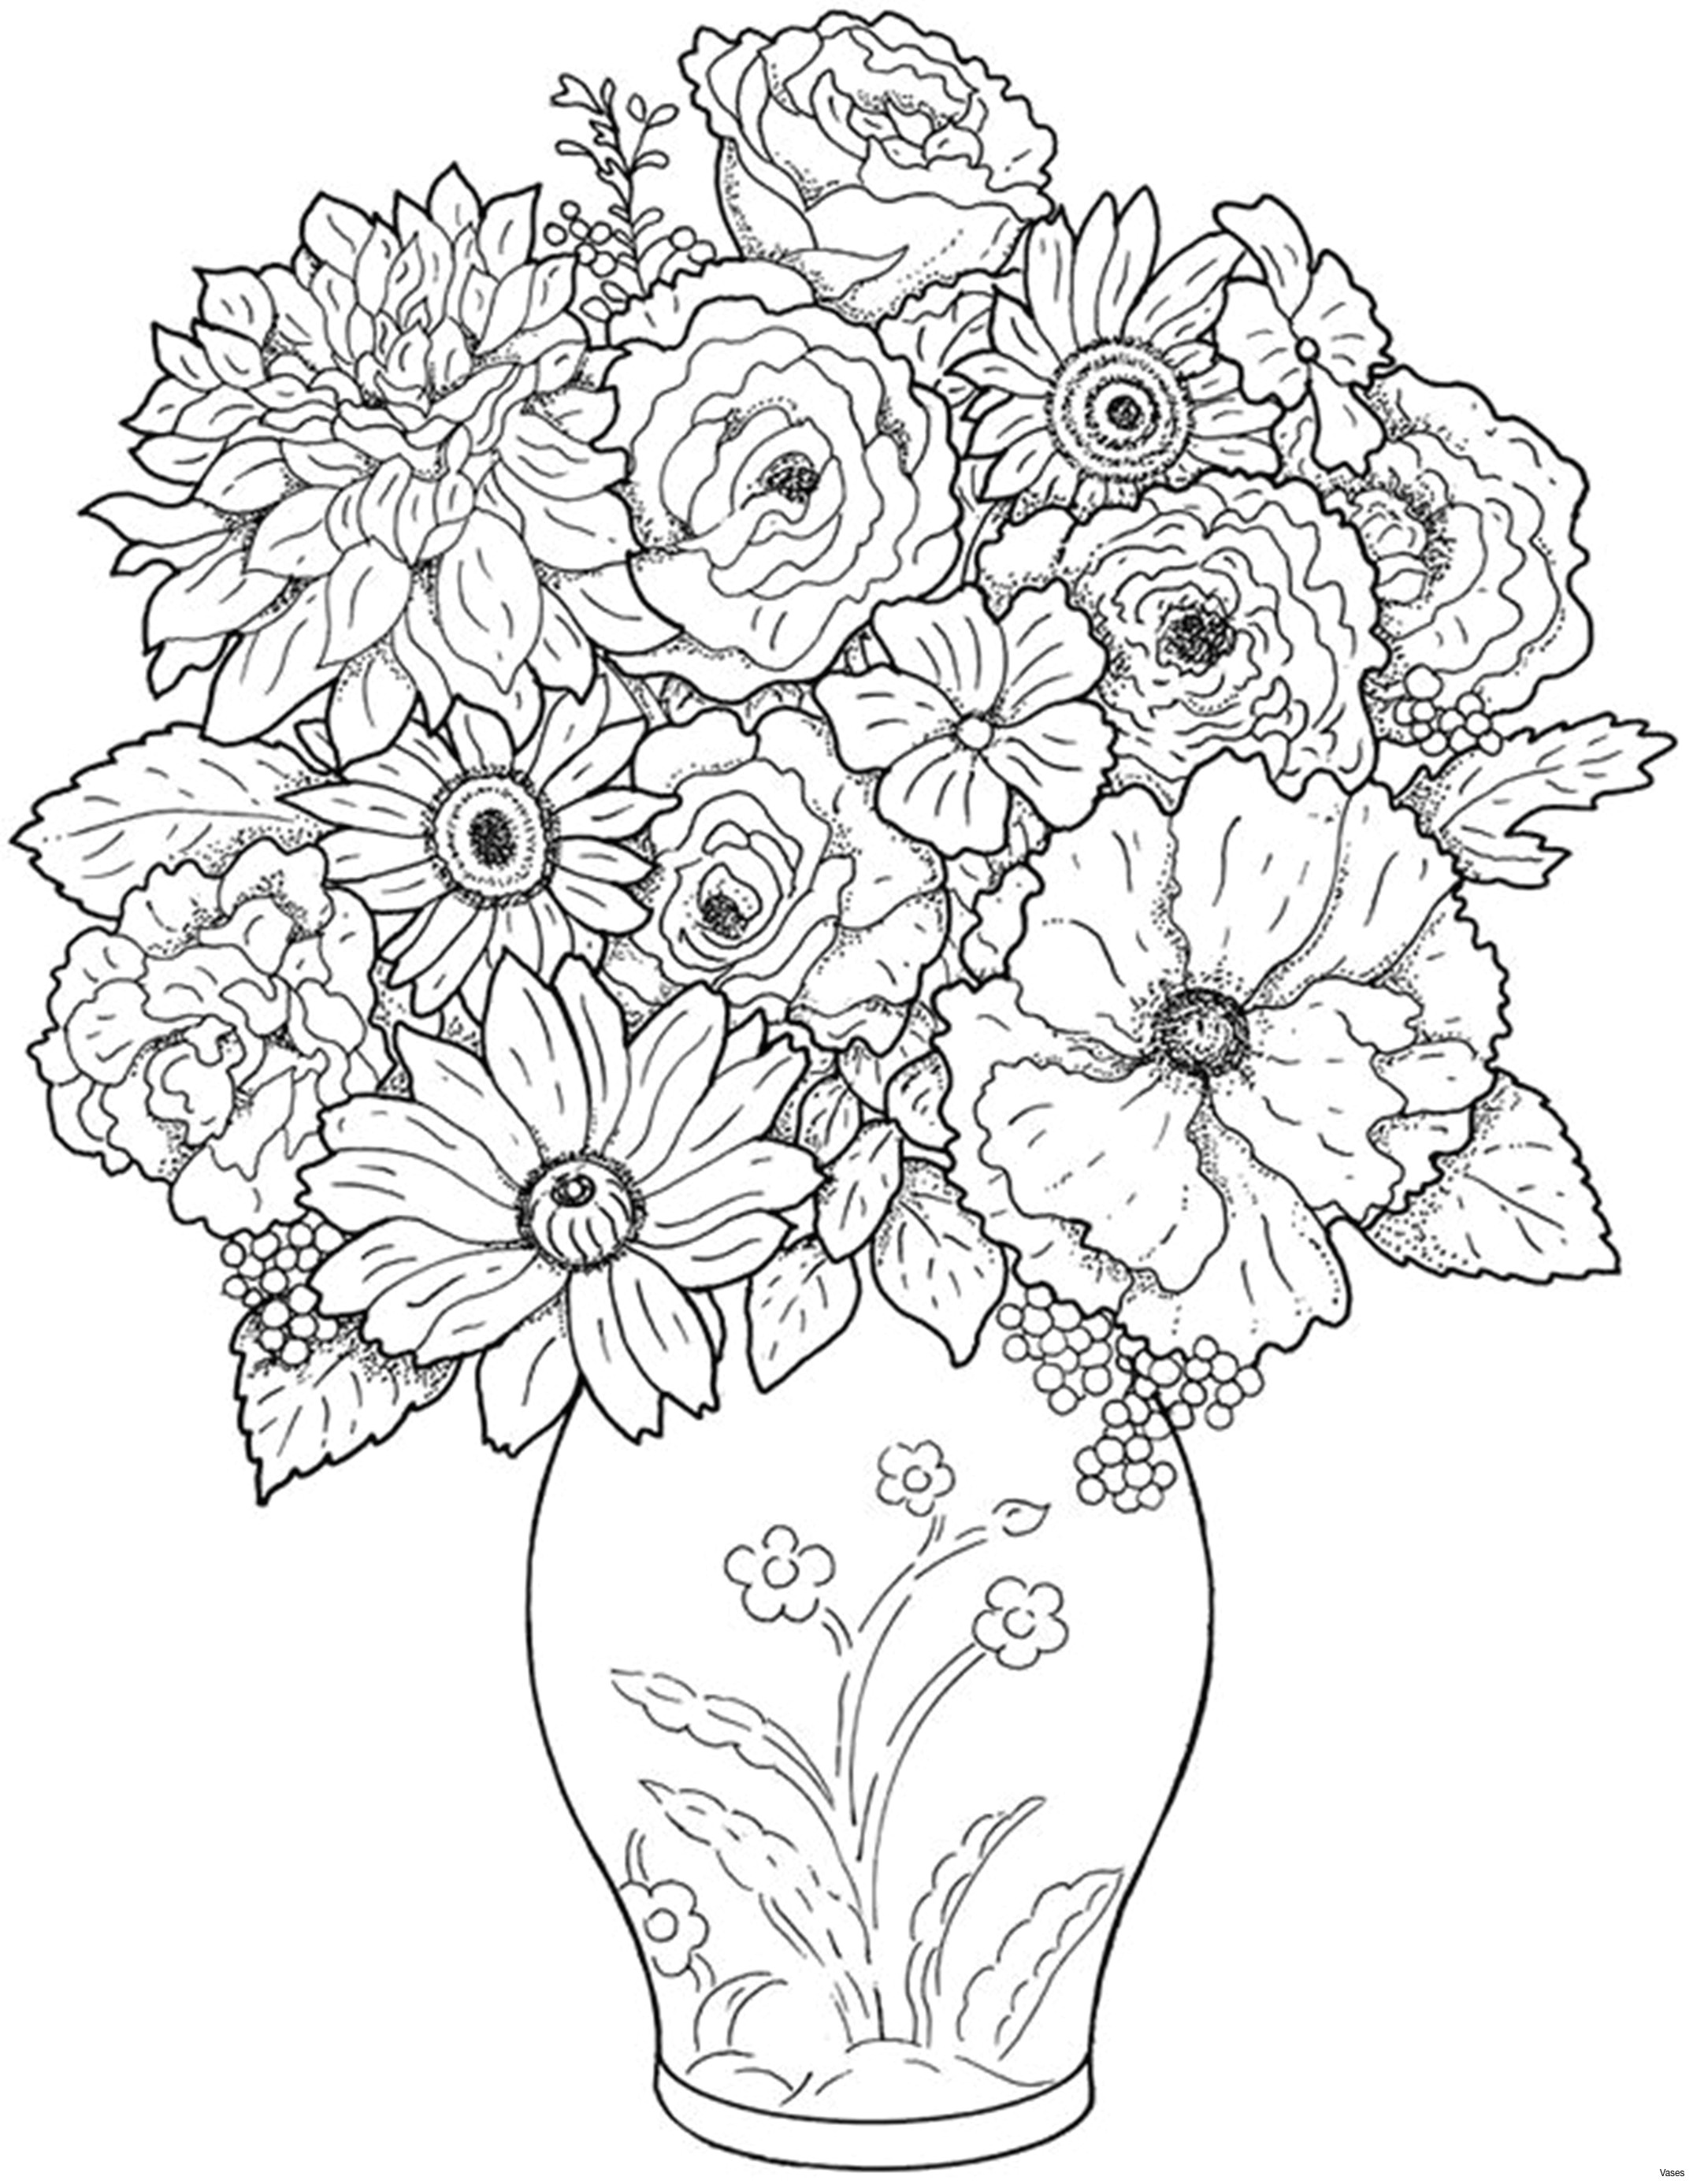 Drawing Flowers with Markers Www Colouring Pages Aua Ergewohnliche Cool Vases Flower Vase Coloring